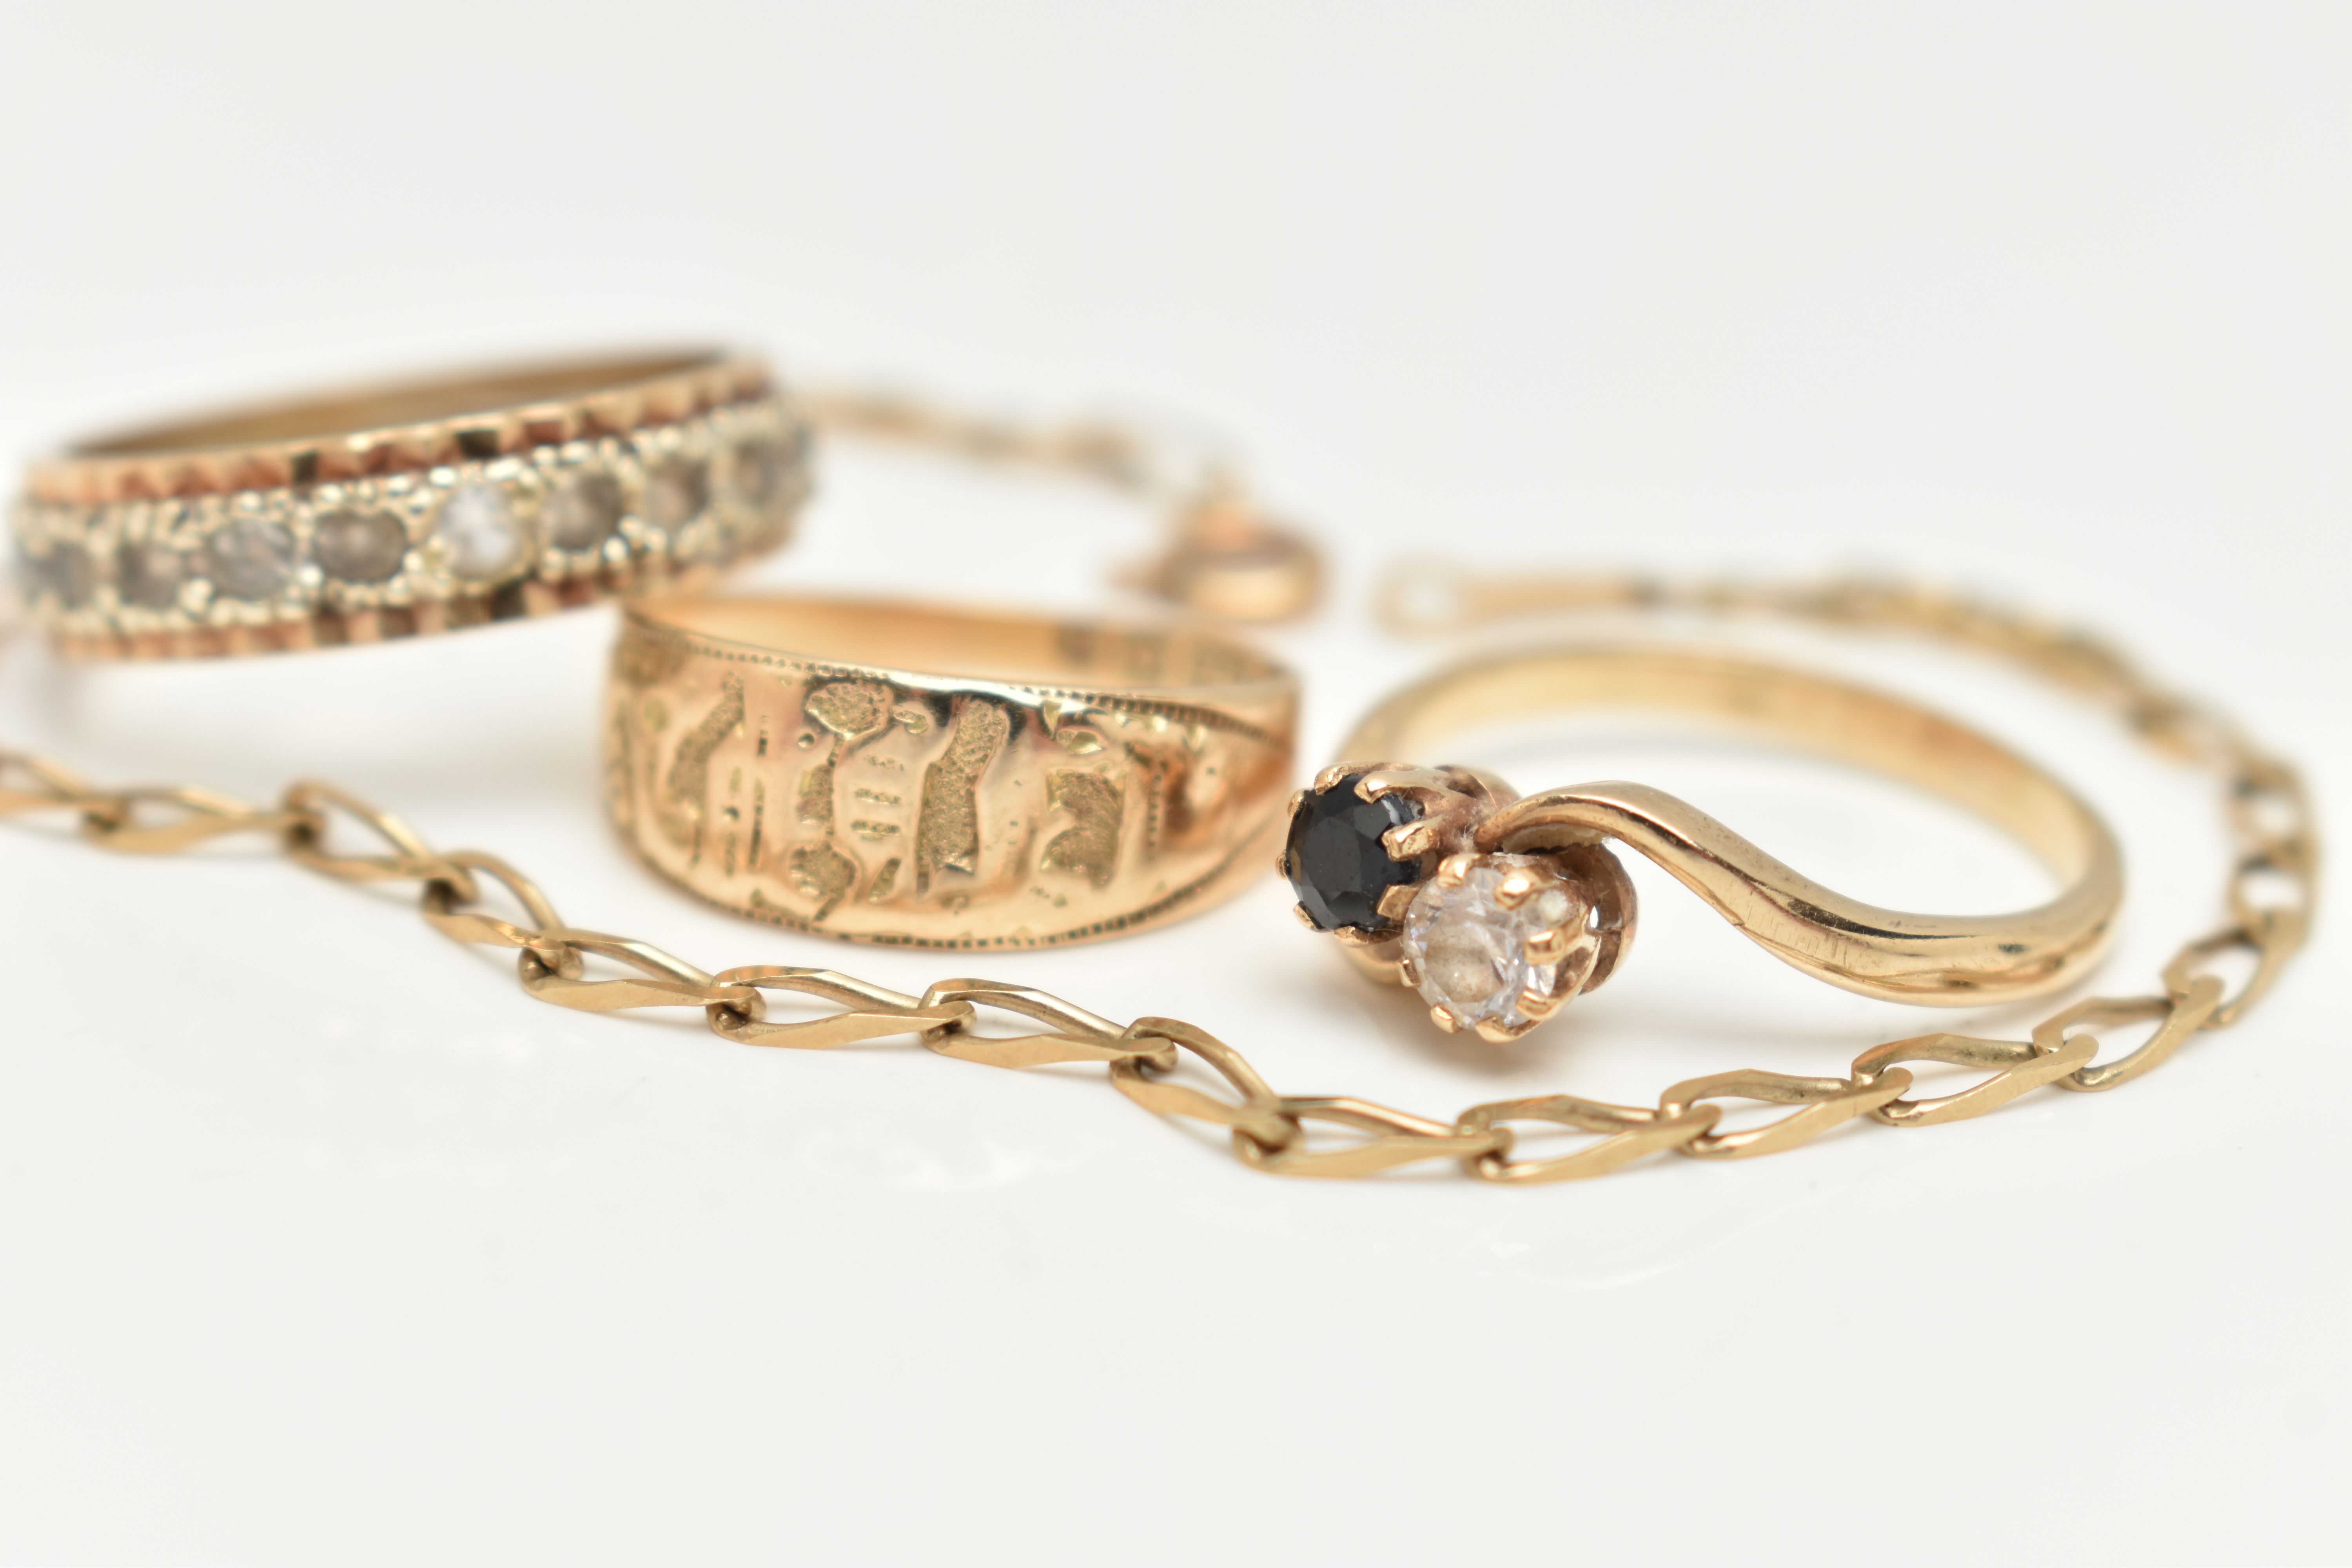 A 9CT GOLD BRACELET AND THREE RINGS, a yellow gold elongated curb link bracelet, fitted with a - Image 4 of 5